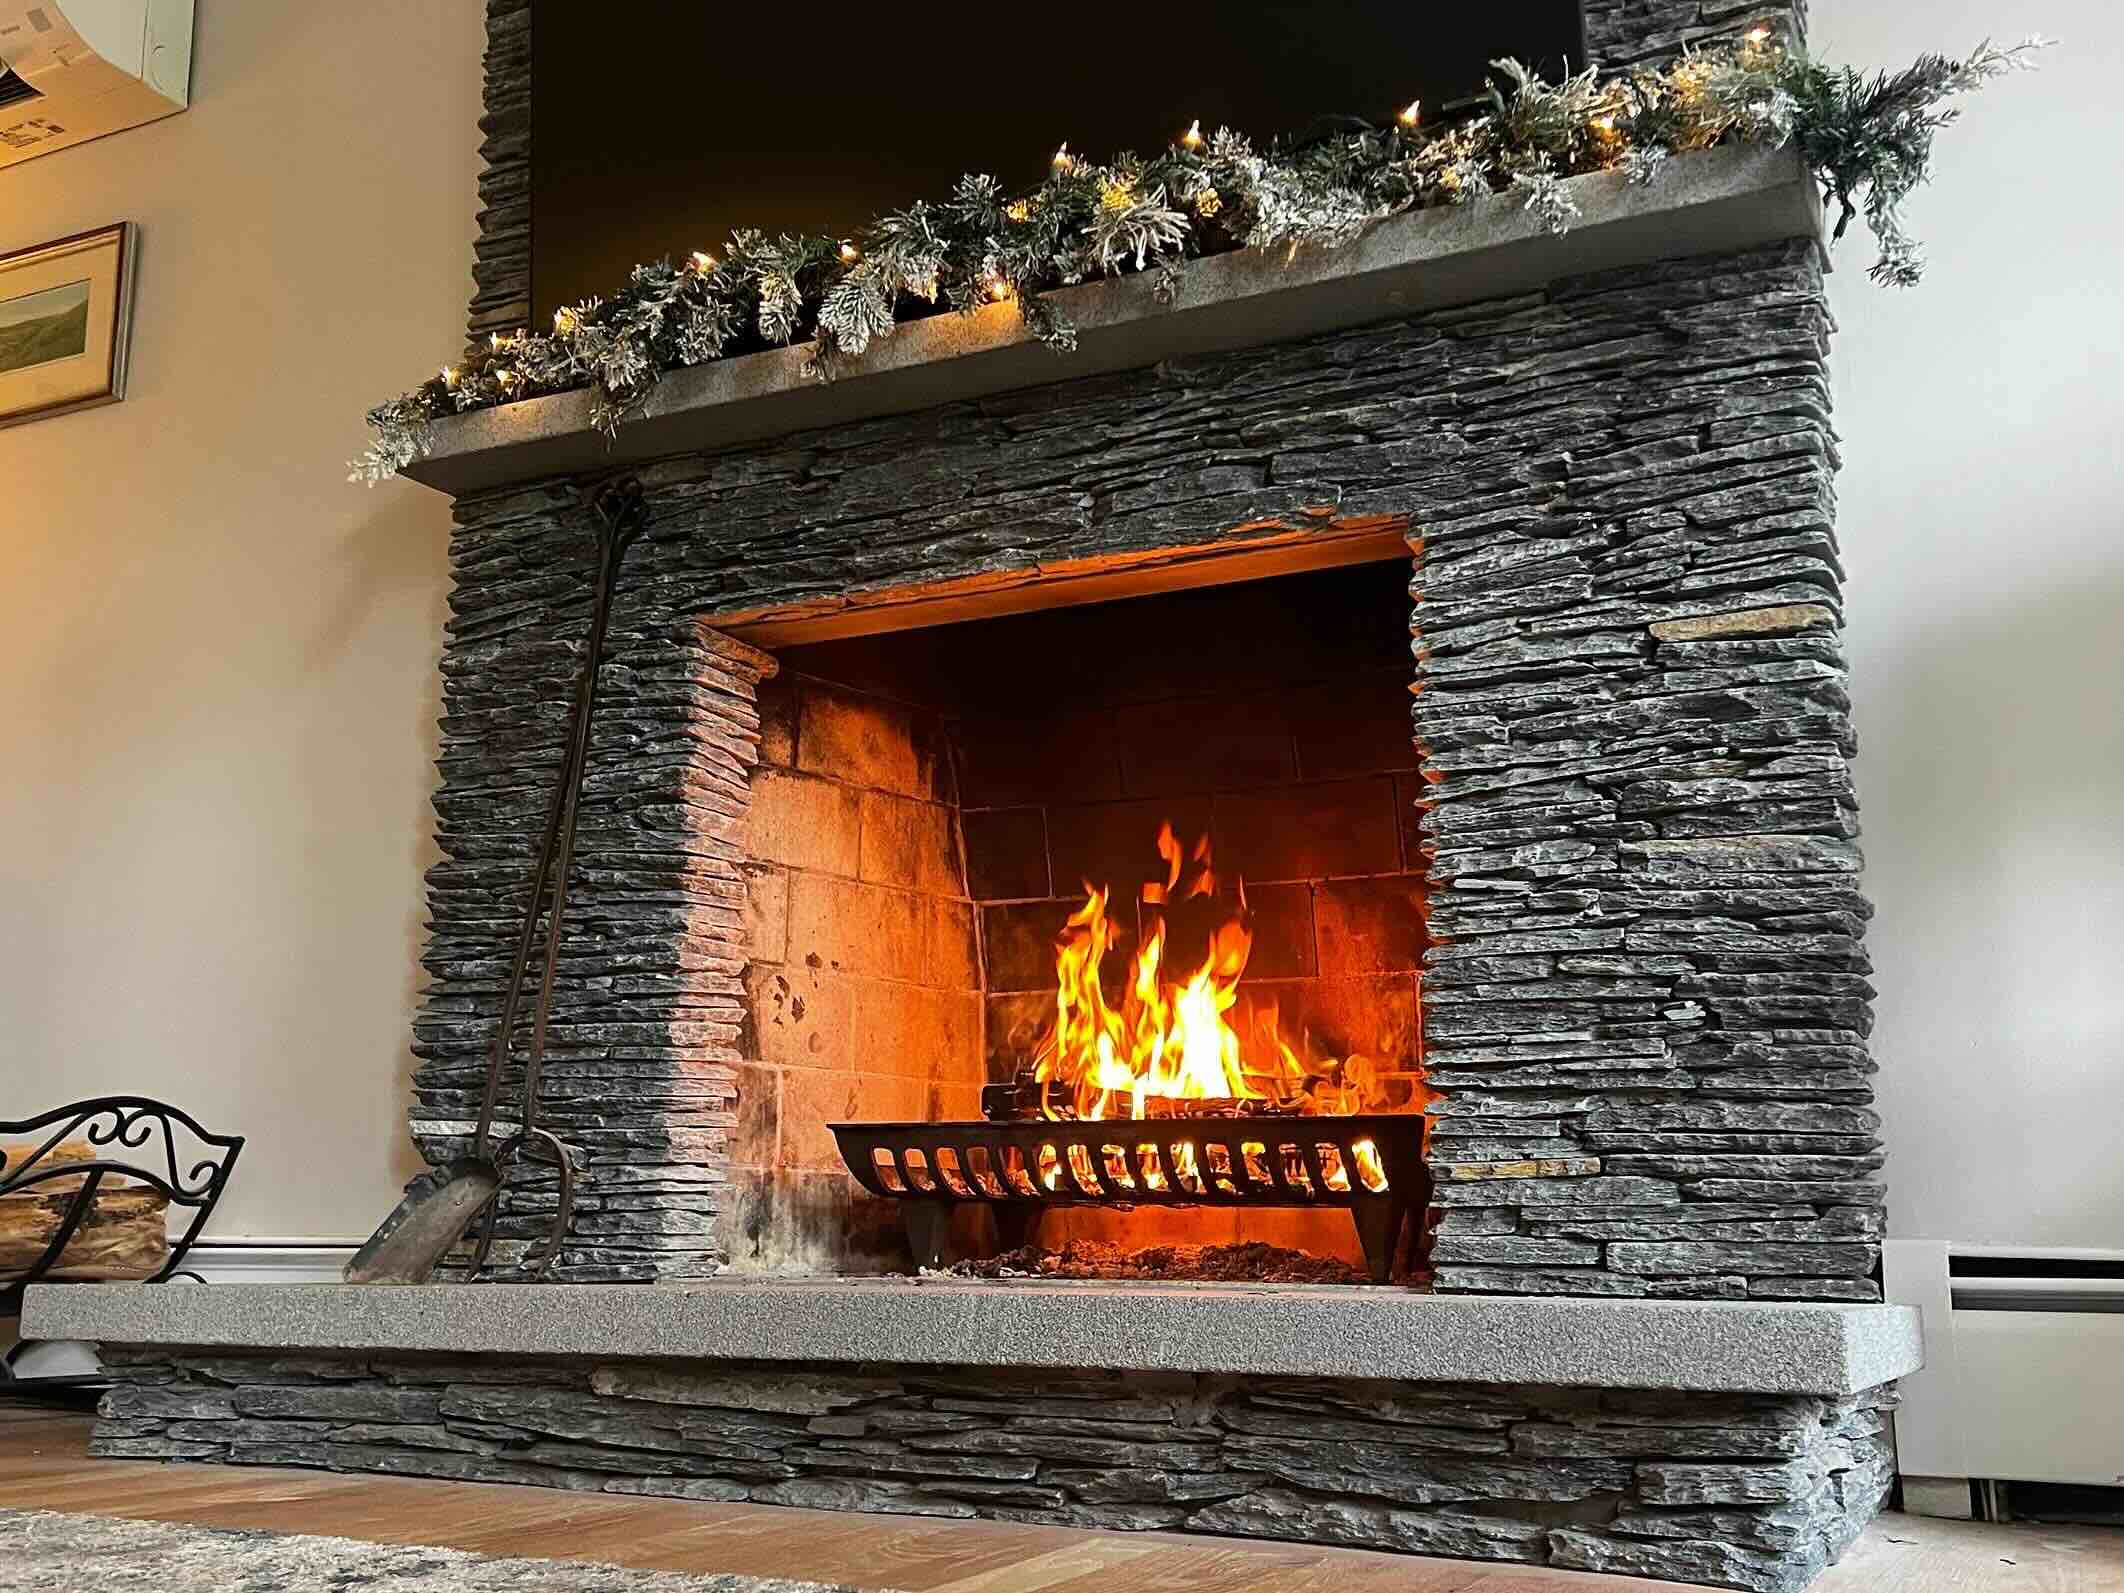 How To Cover Brick Fireplace With Stone Veneer